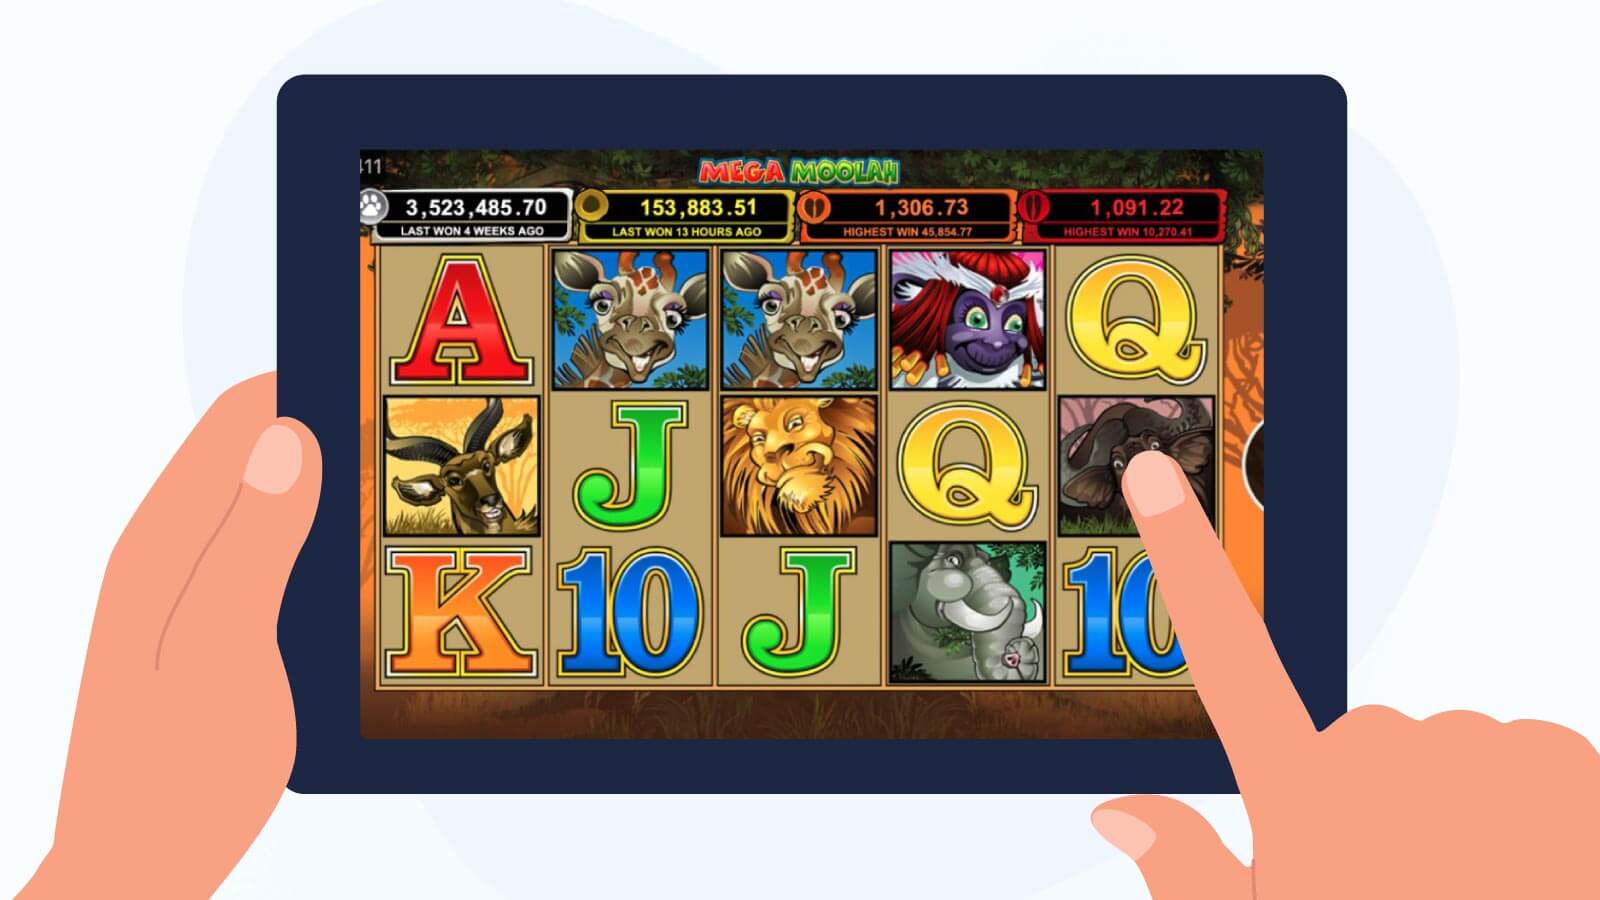 Key features about this slot machine